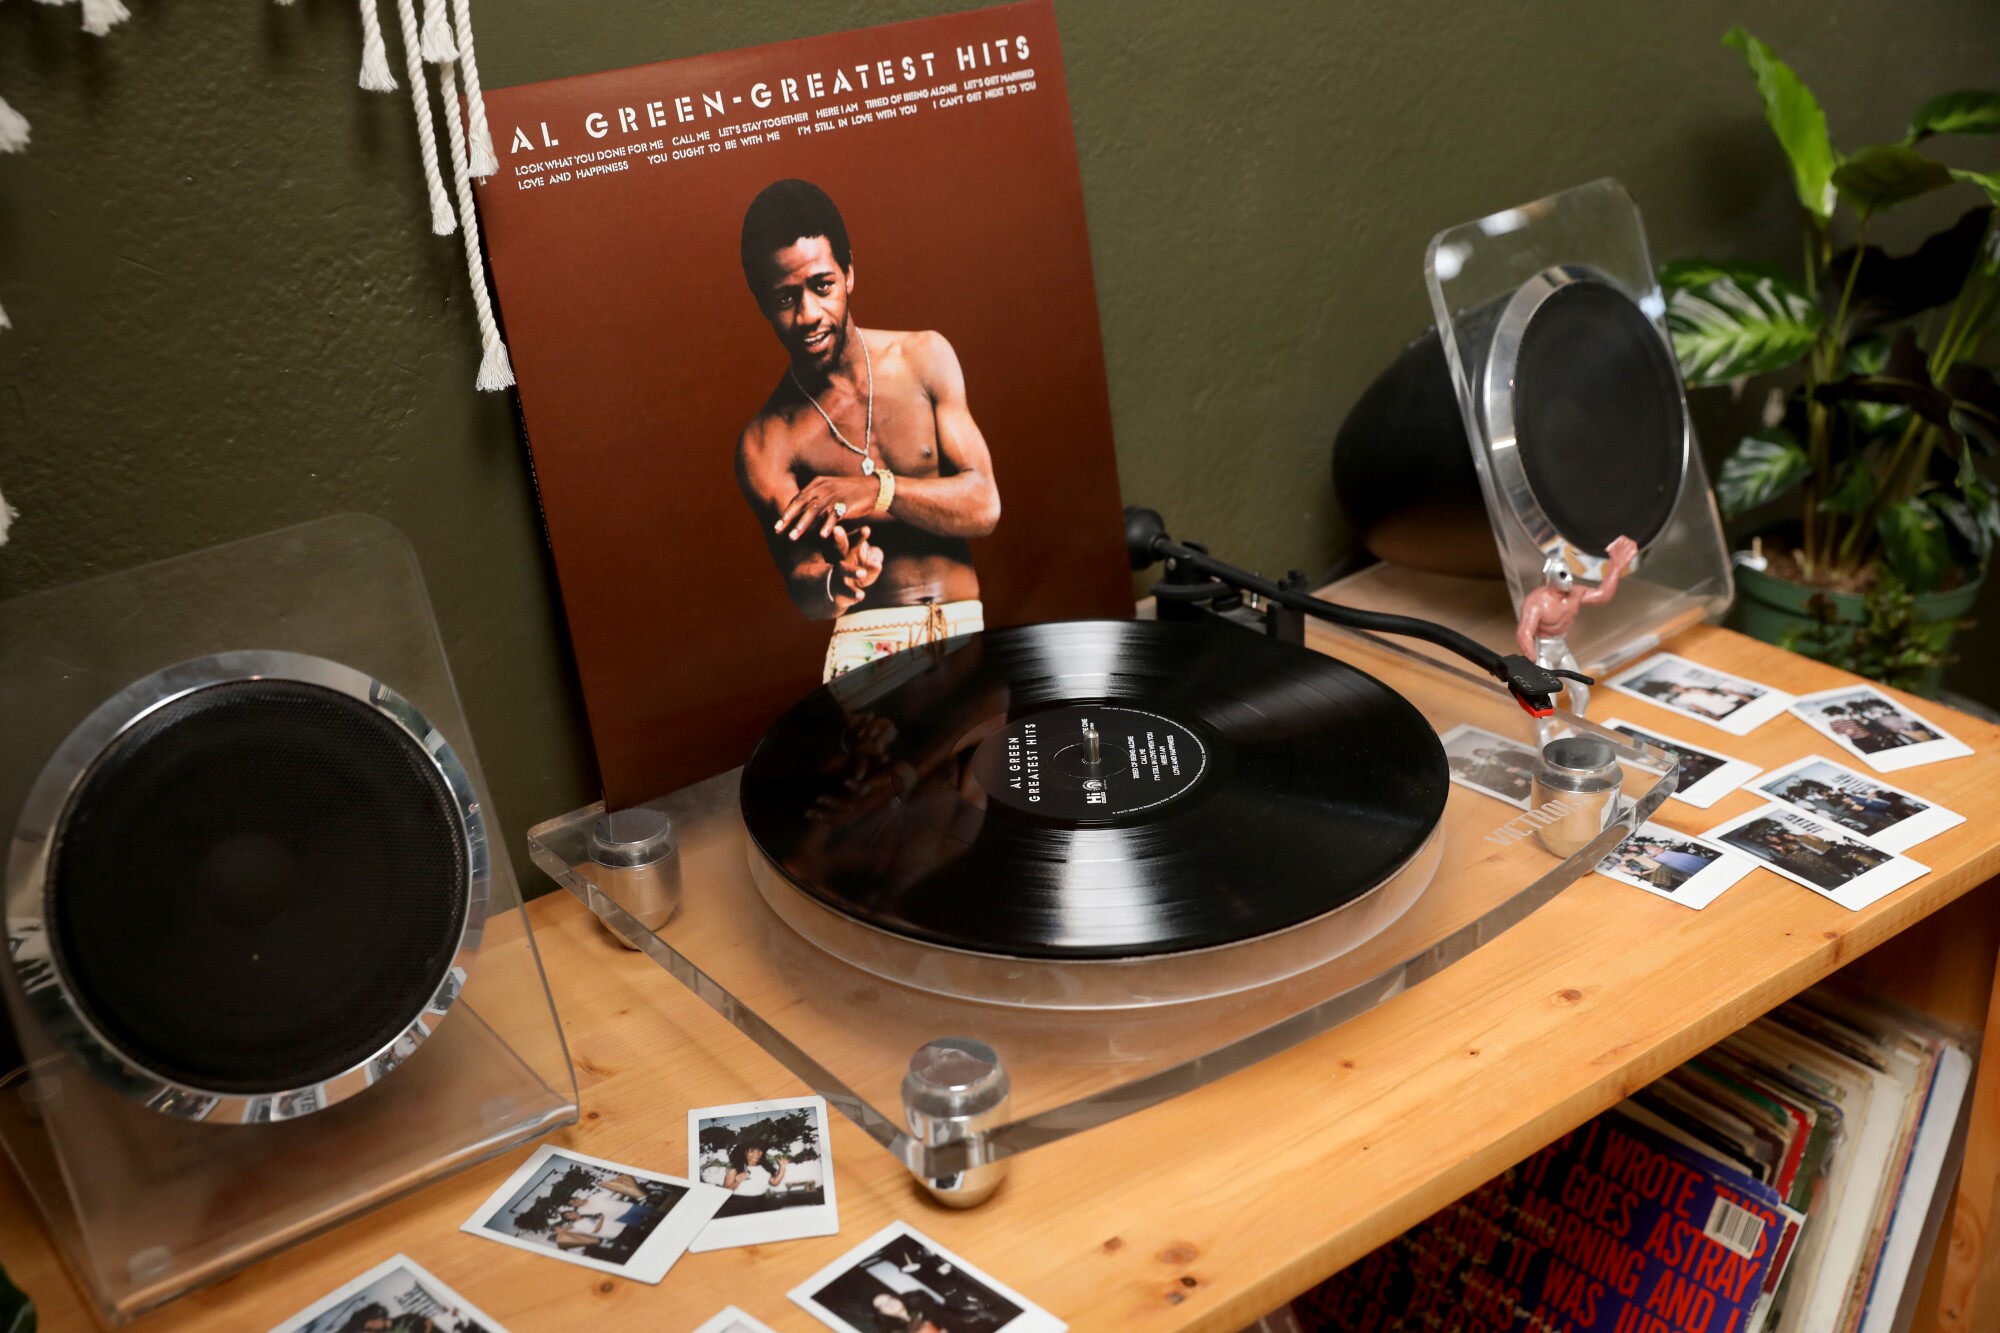 A turntable sits on a handmade case displaying an Al Green album cover, flanked by plants and Polaroid photos.